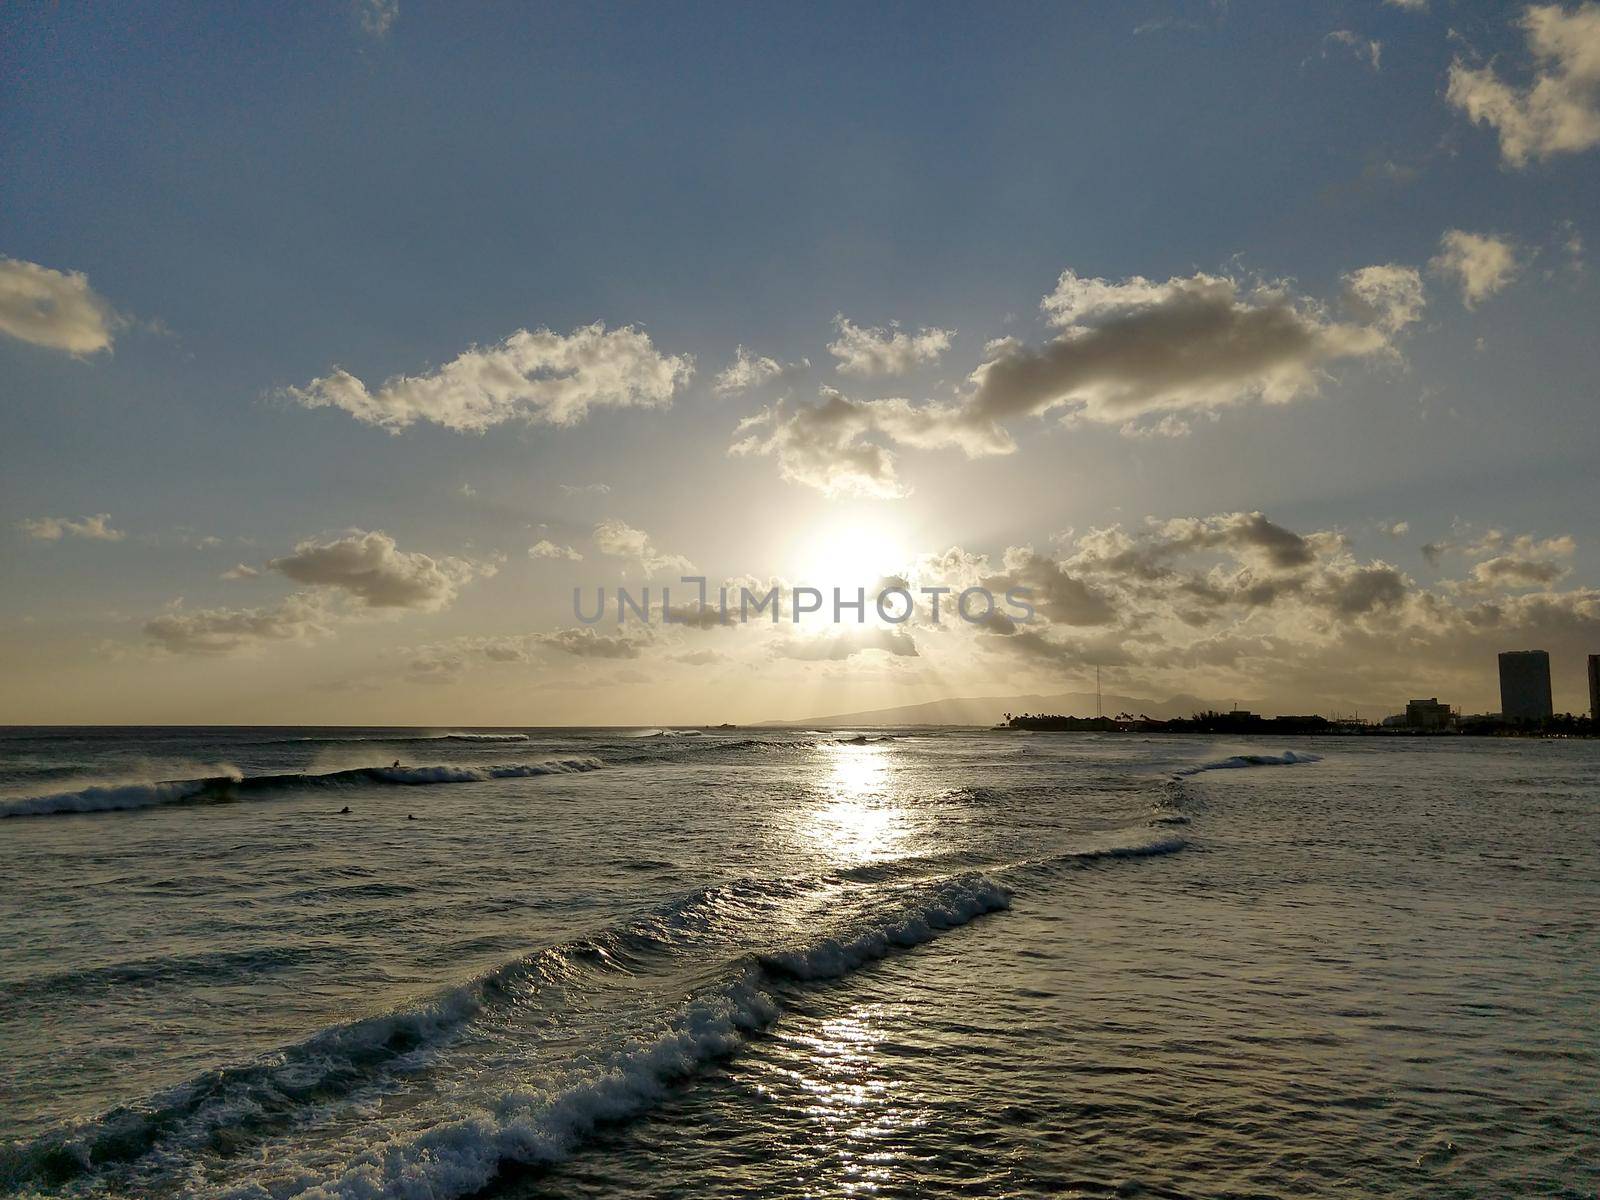 Sunset in the clouds on as wave lap towards the beach from the ocean at Ala Moana Beach Park on Oahu, Hawaii.